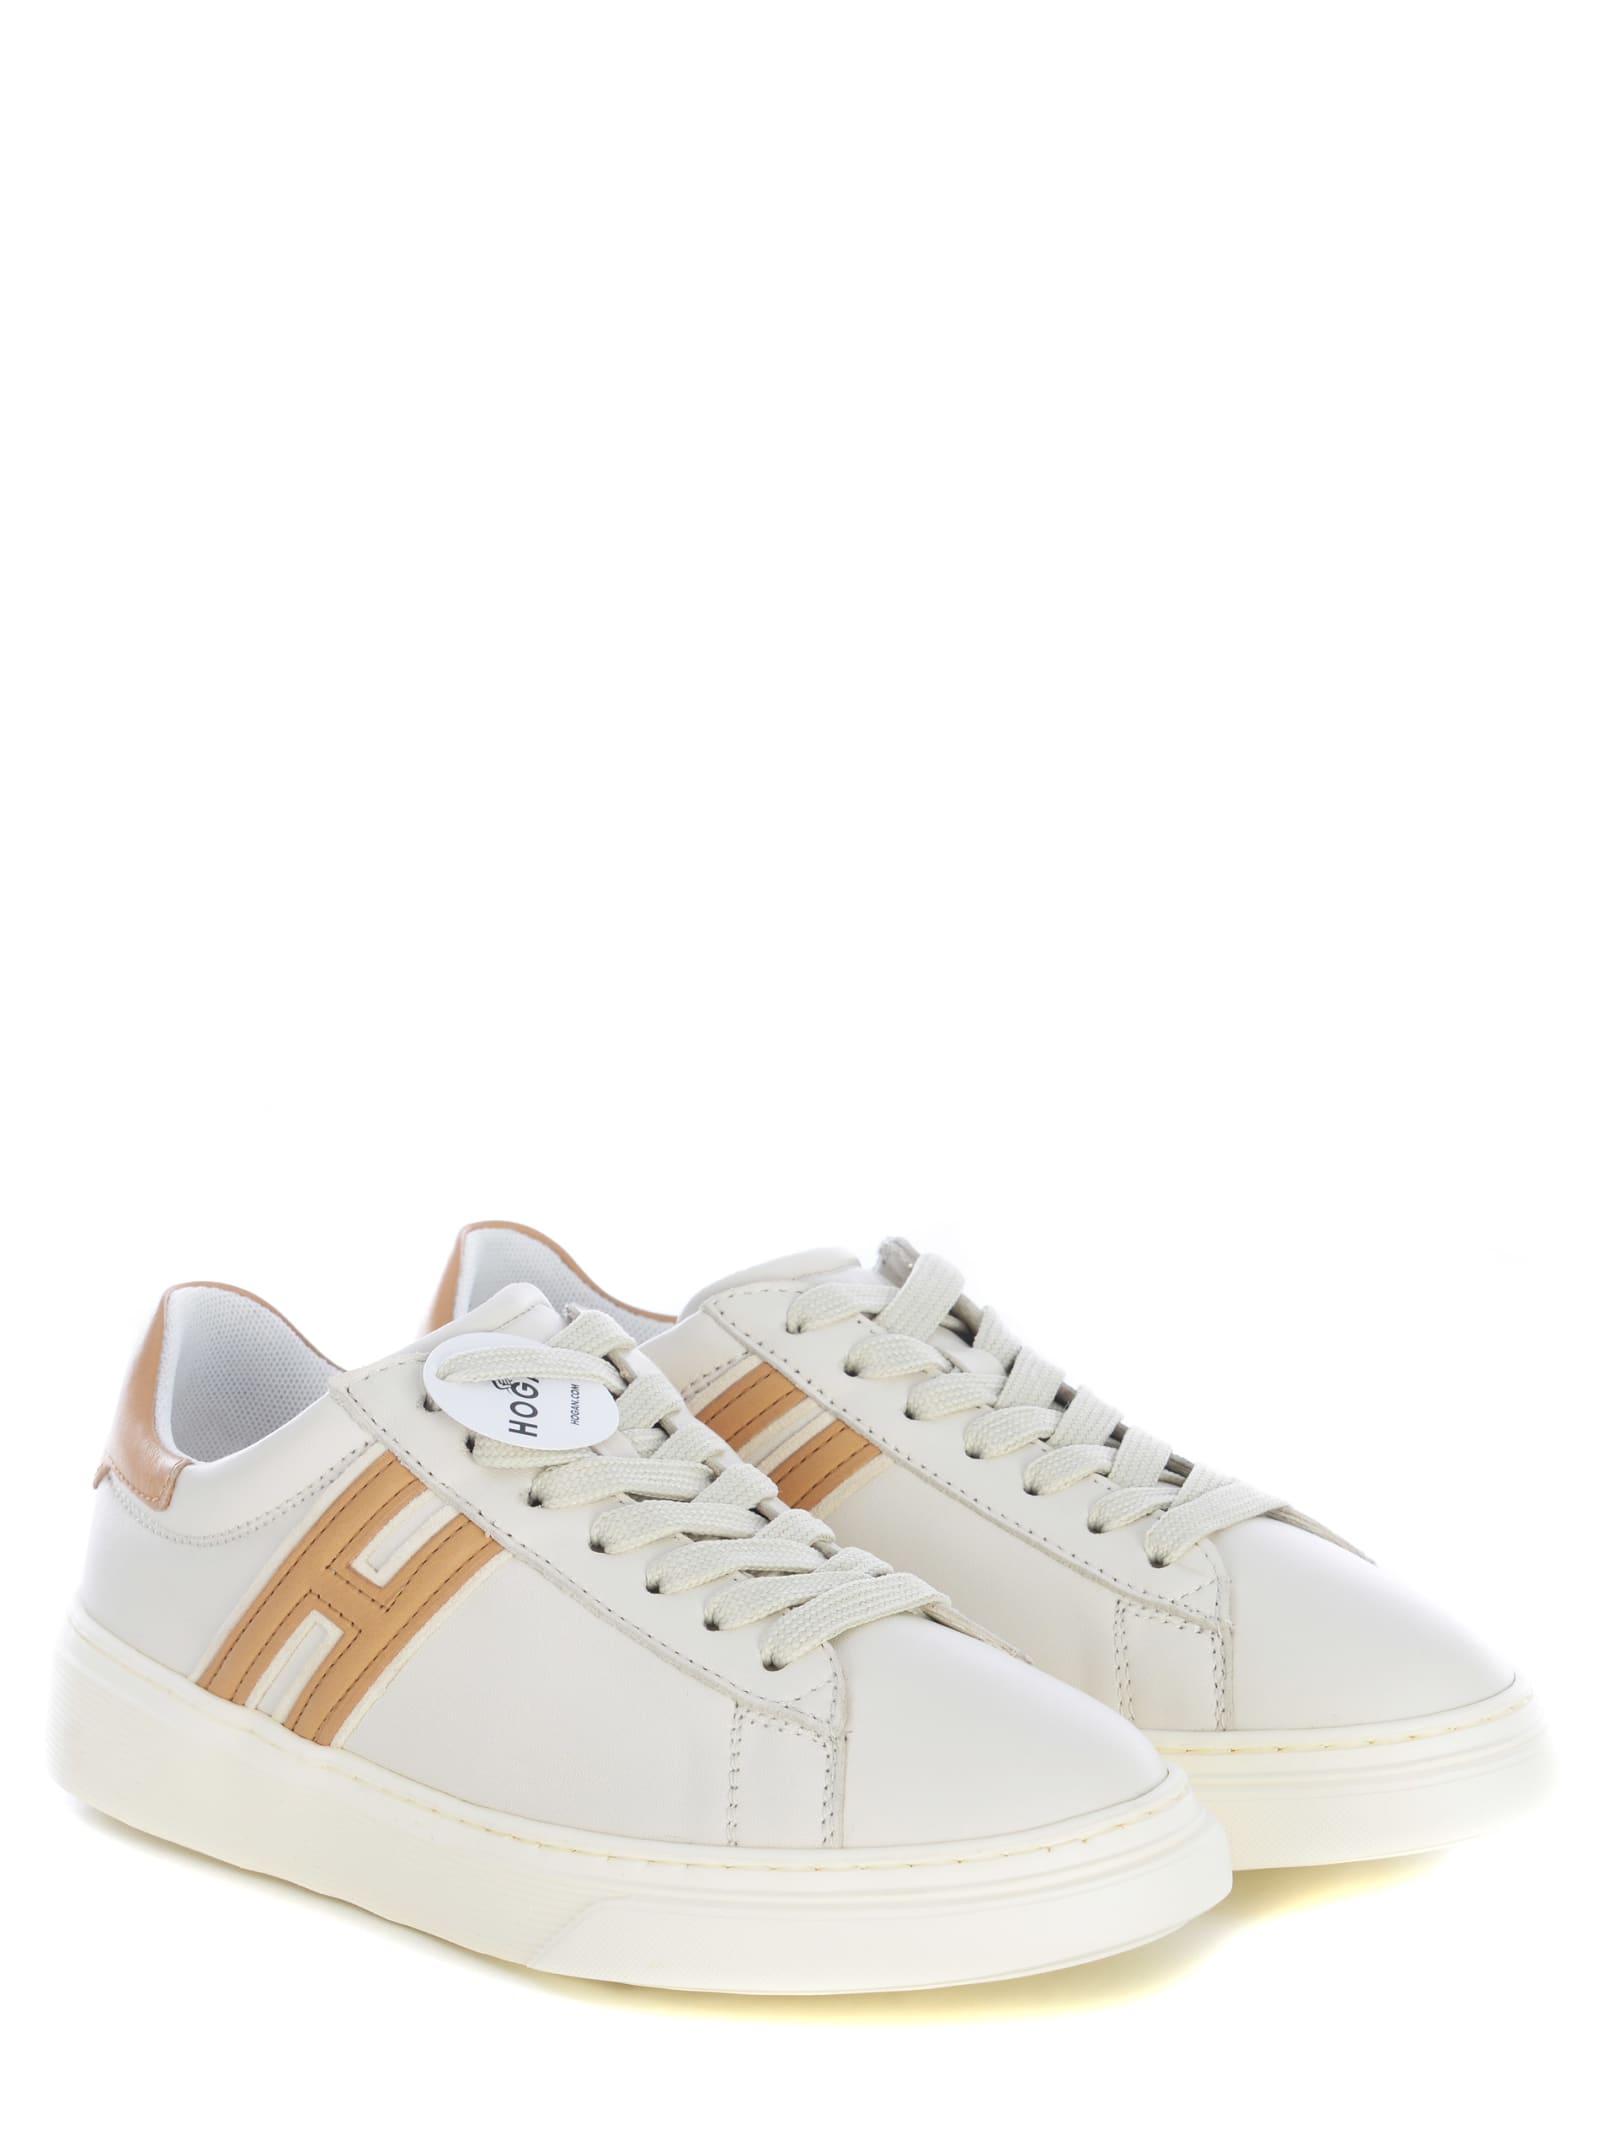 Shop Hogan Sneakers  H365 Made Of Leather In Avorio